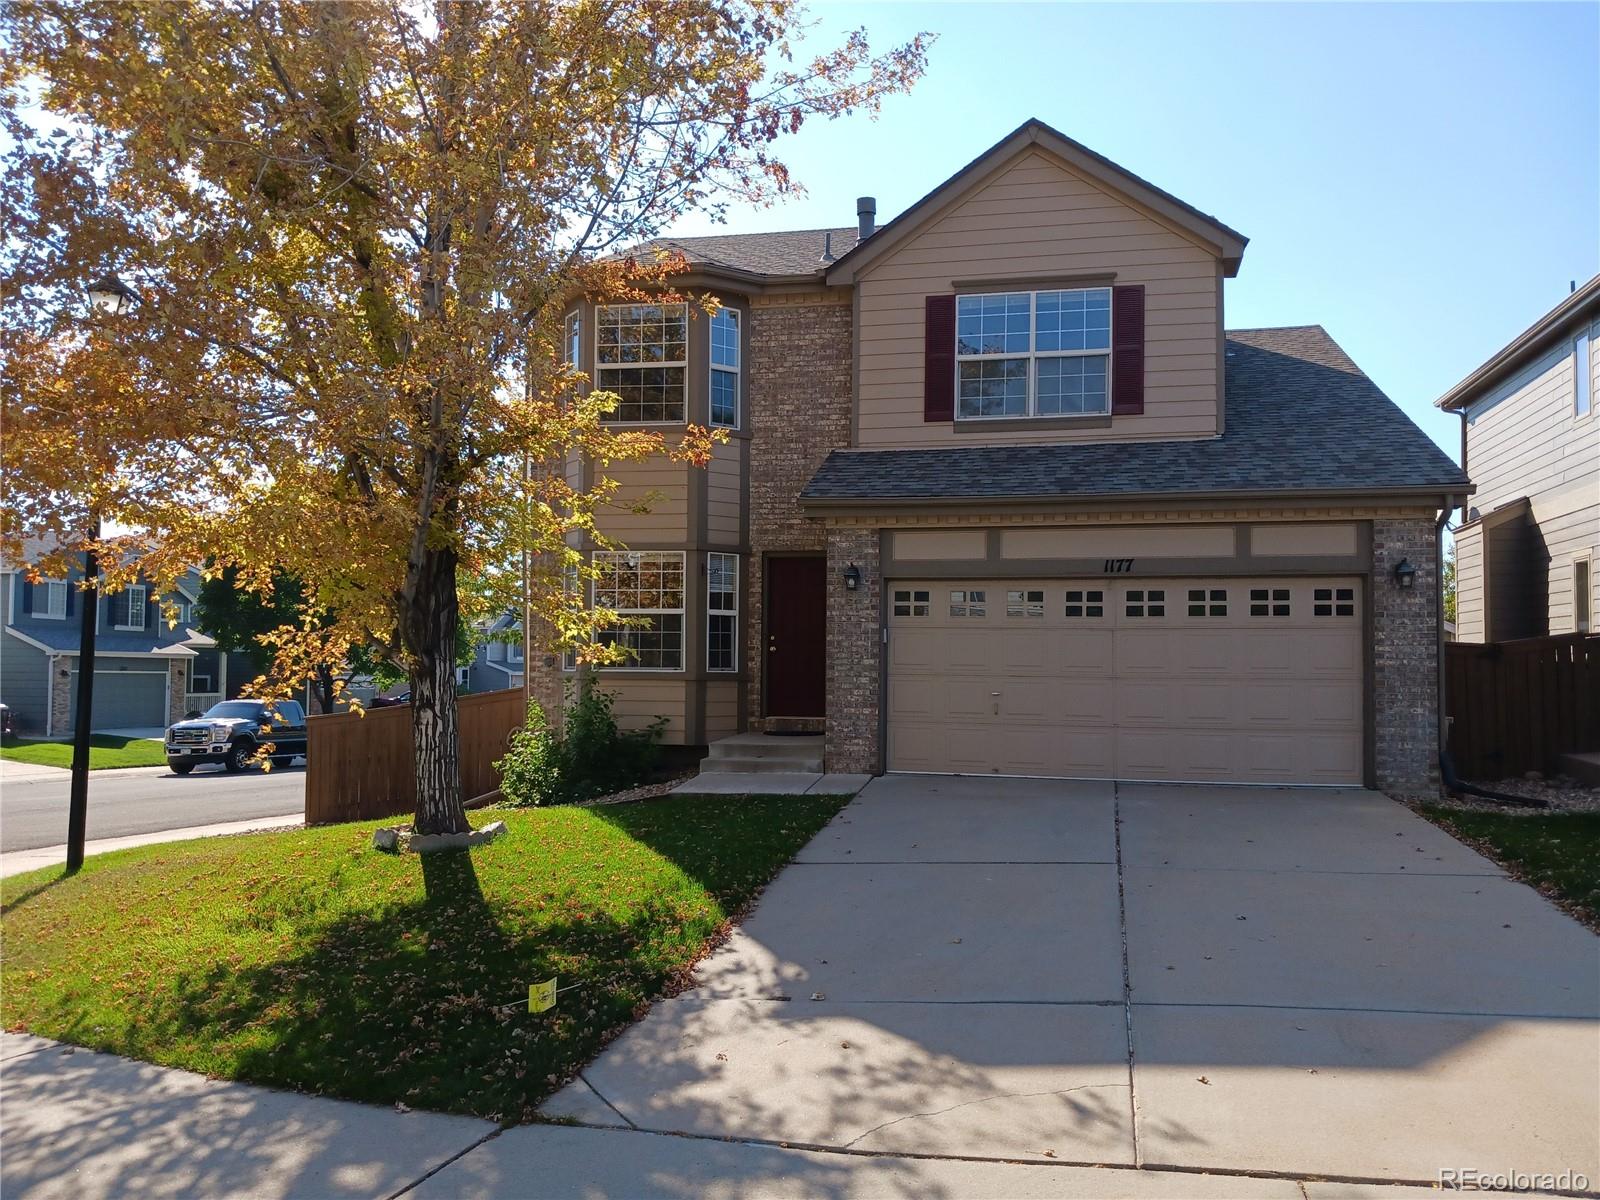 1177  Mulberry Lane, highlands ranch MLS: 8715872 Beds: 3 Baths: 3 Price: $619,000